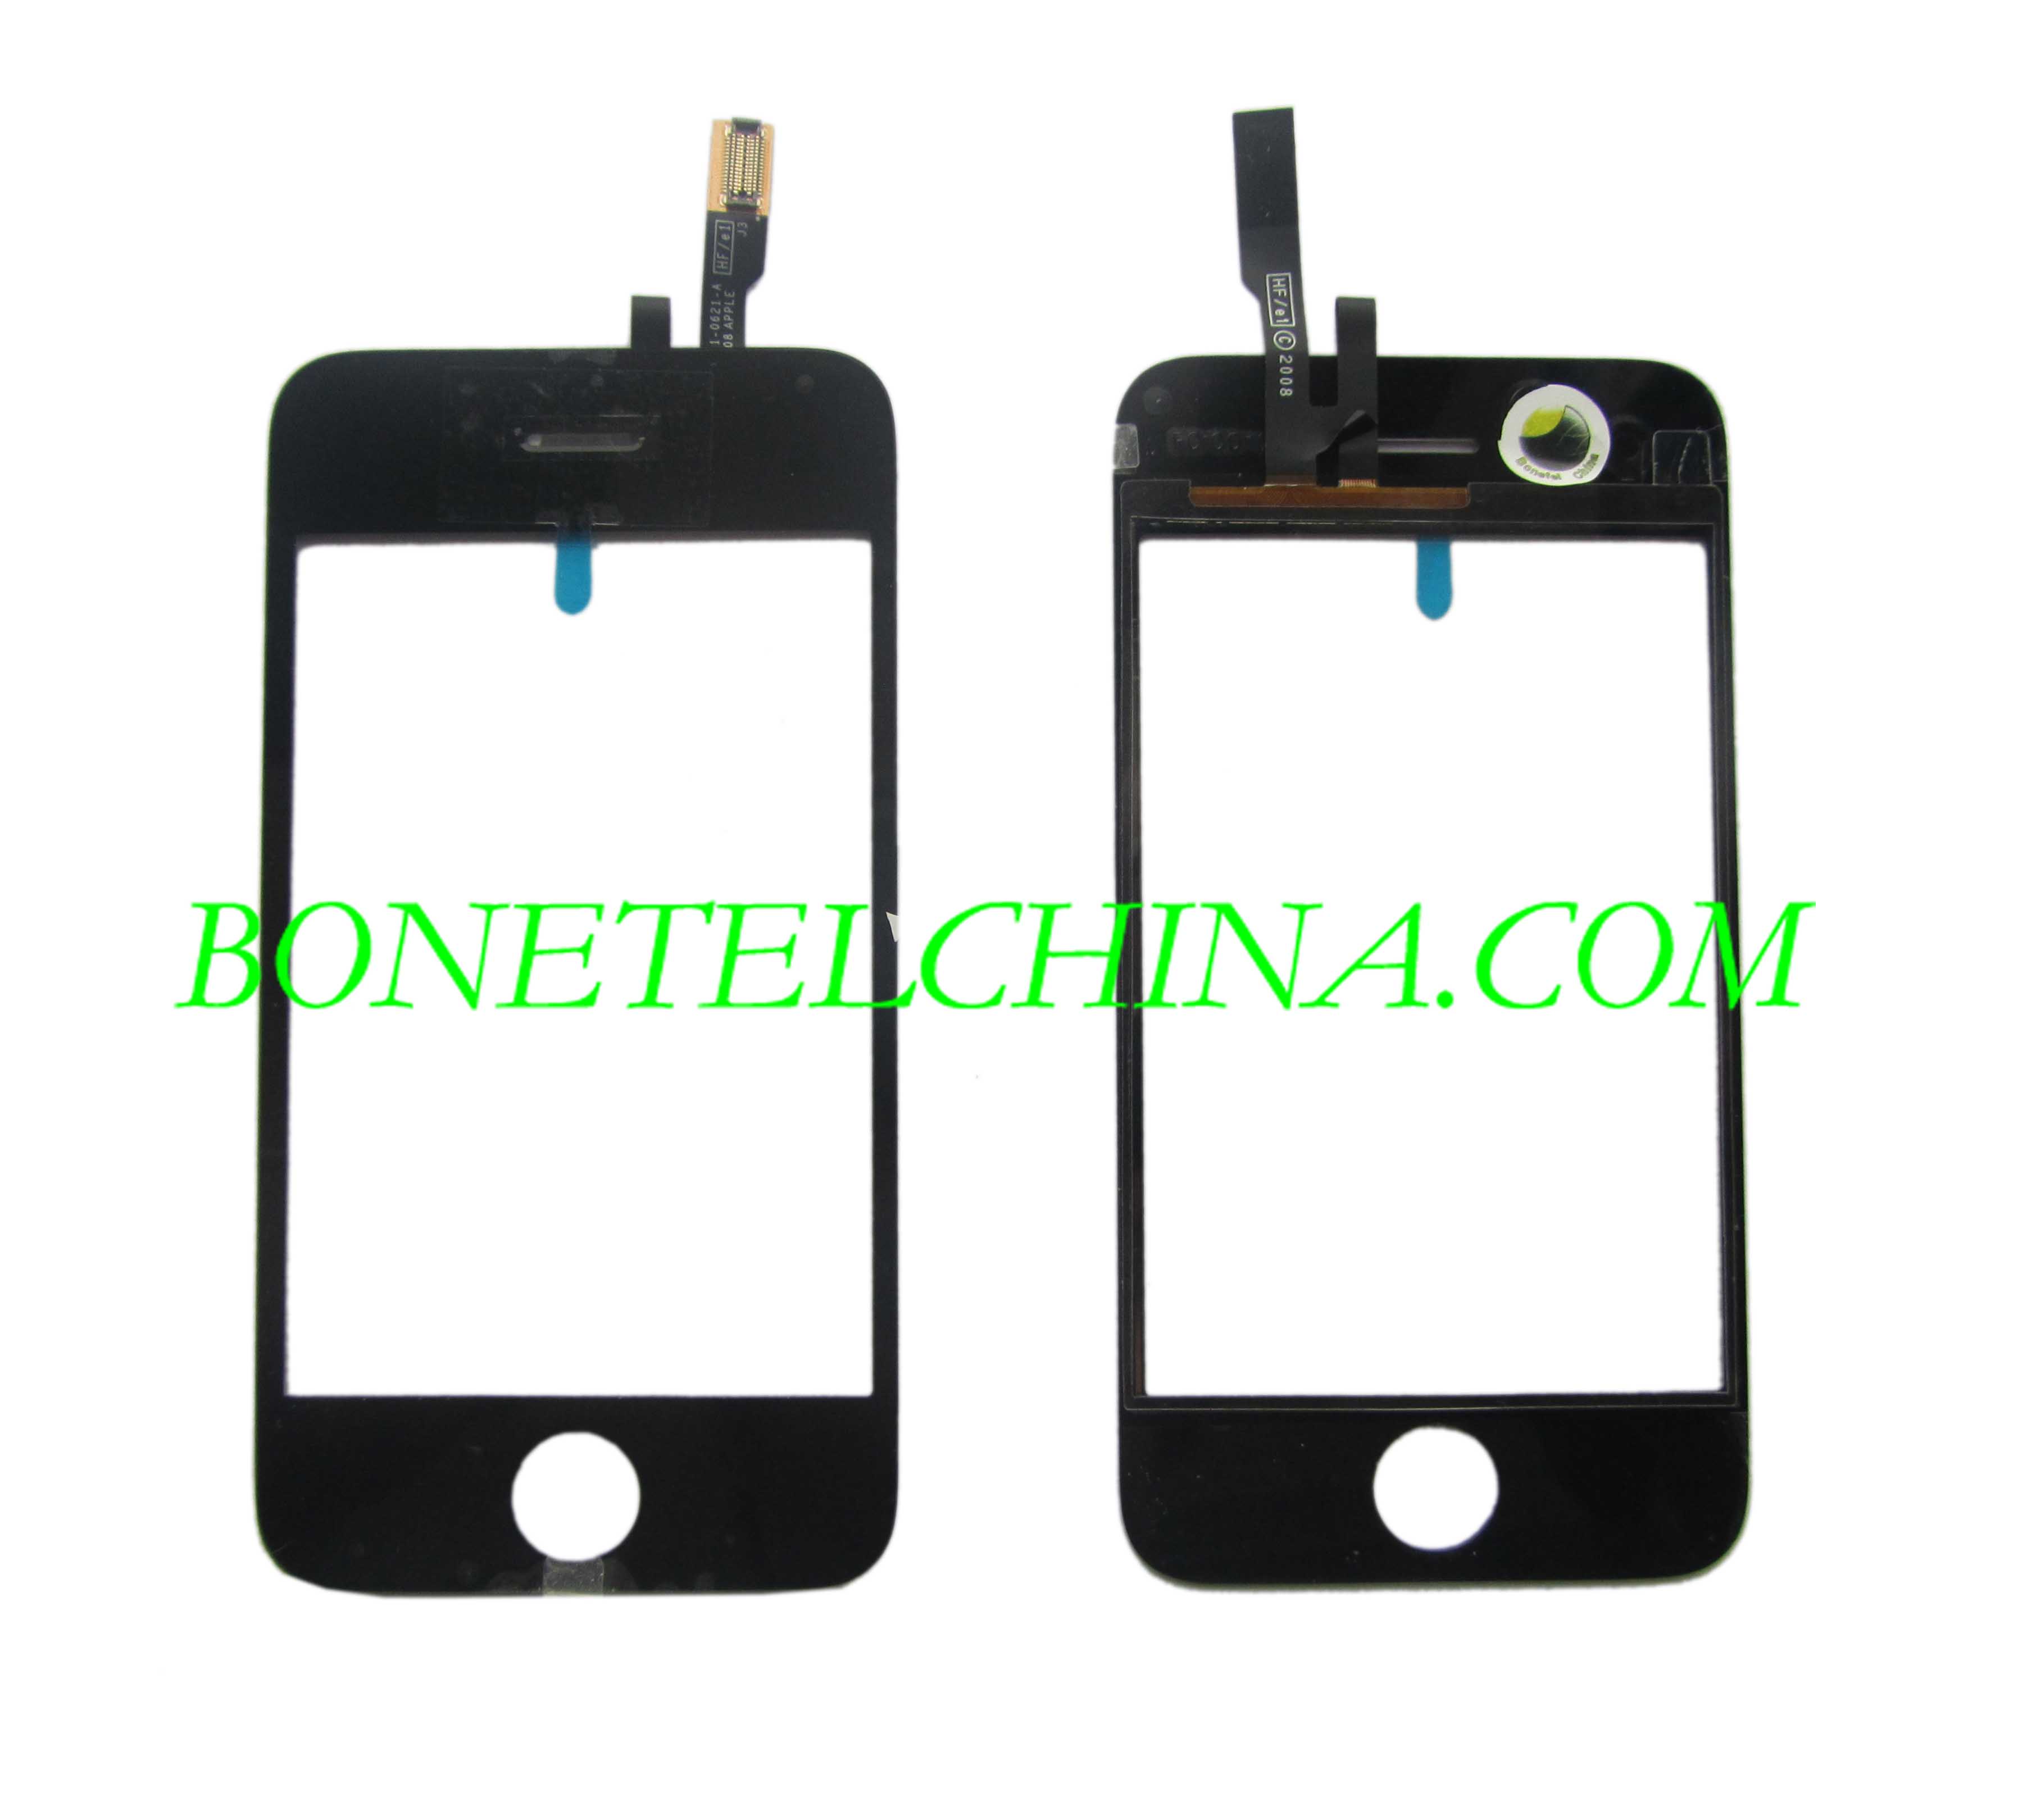 Mobile phone touch screen for iPhone 3G